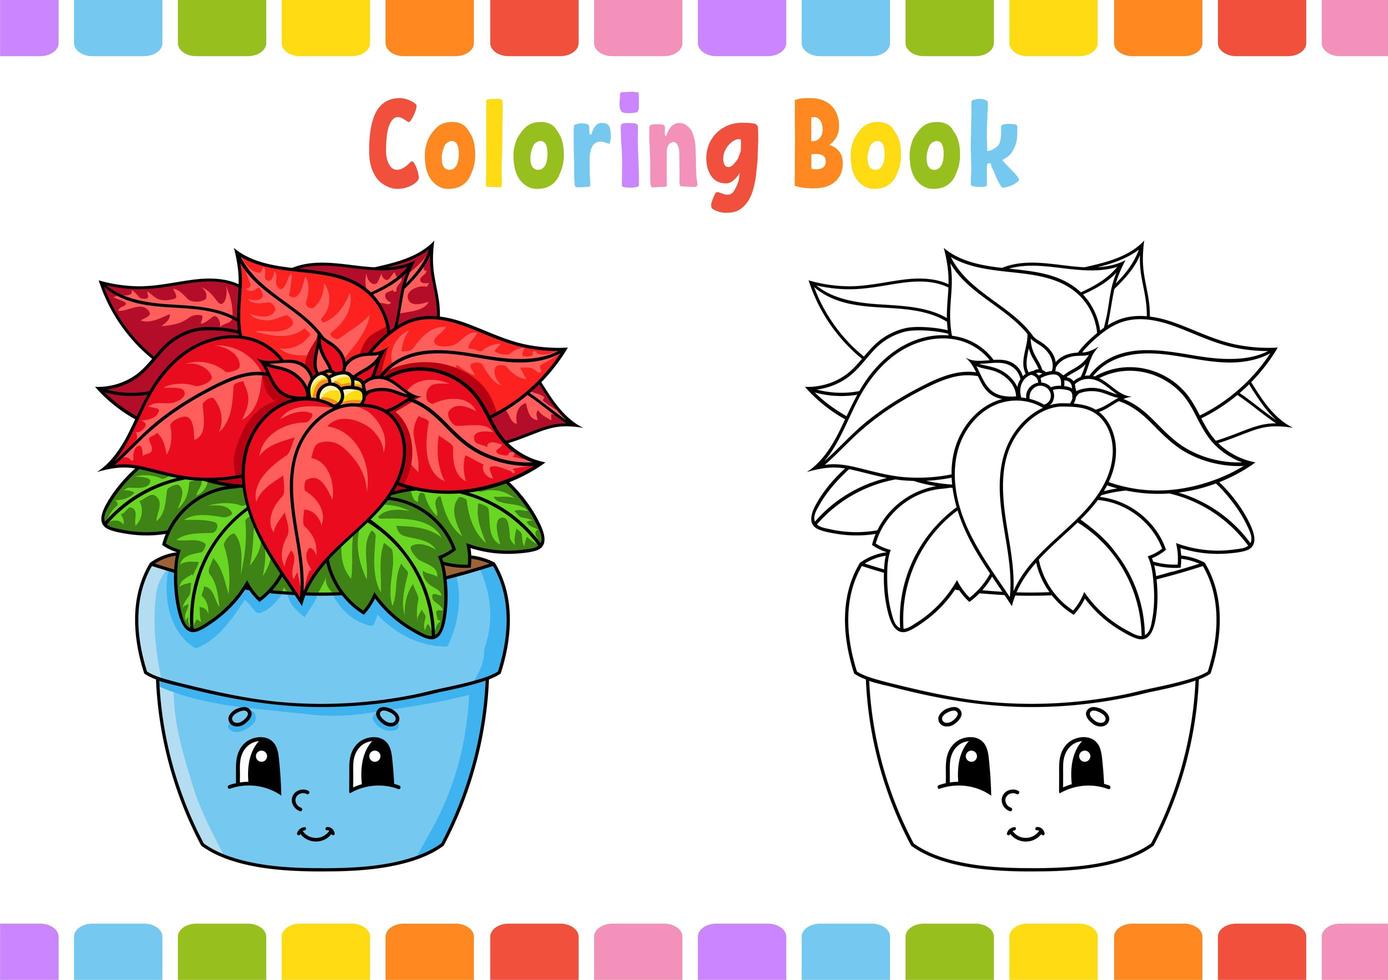 Coloring book for kids. Poinsettia flower. Cartoon character. Vector illustration. Fantasy page for children. Black contour silhouette. Isolated on white background.